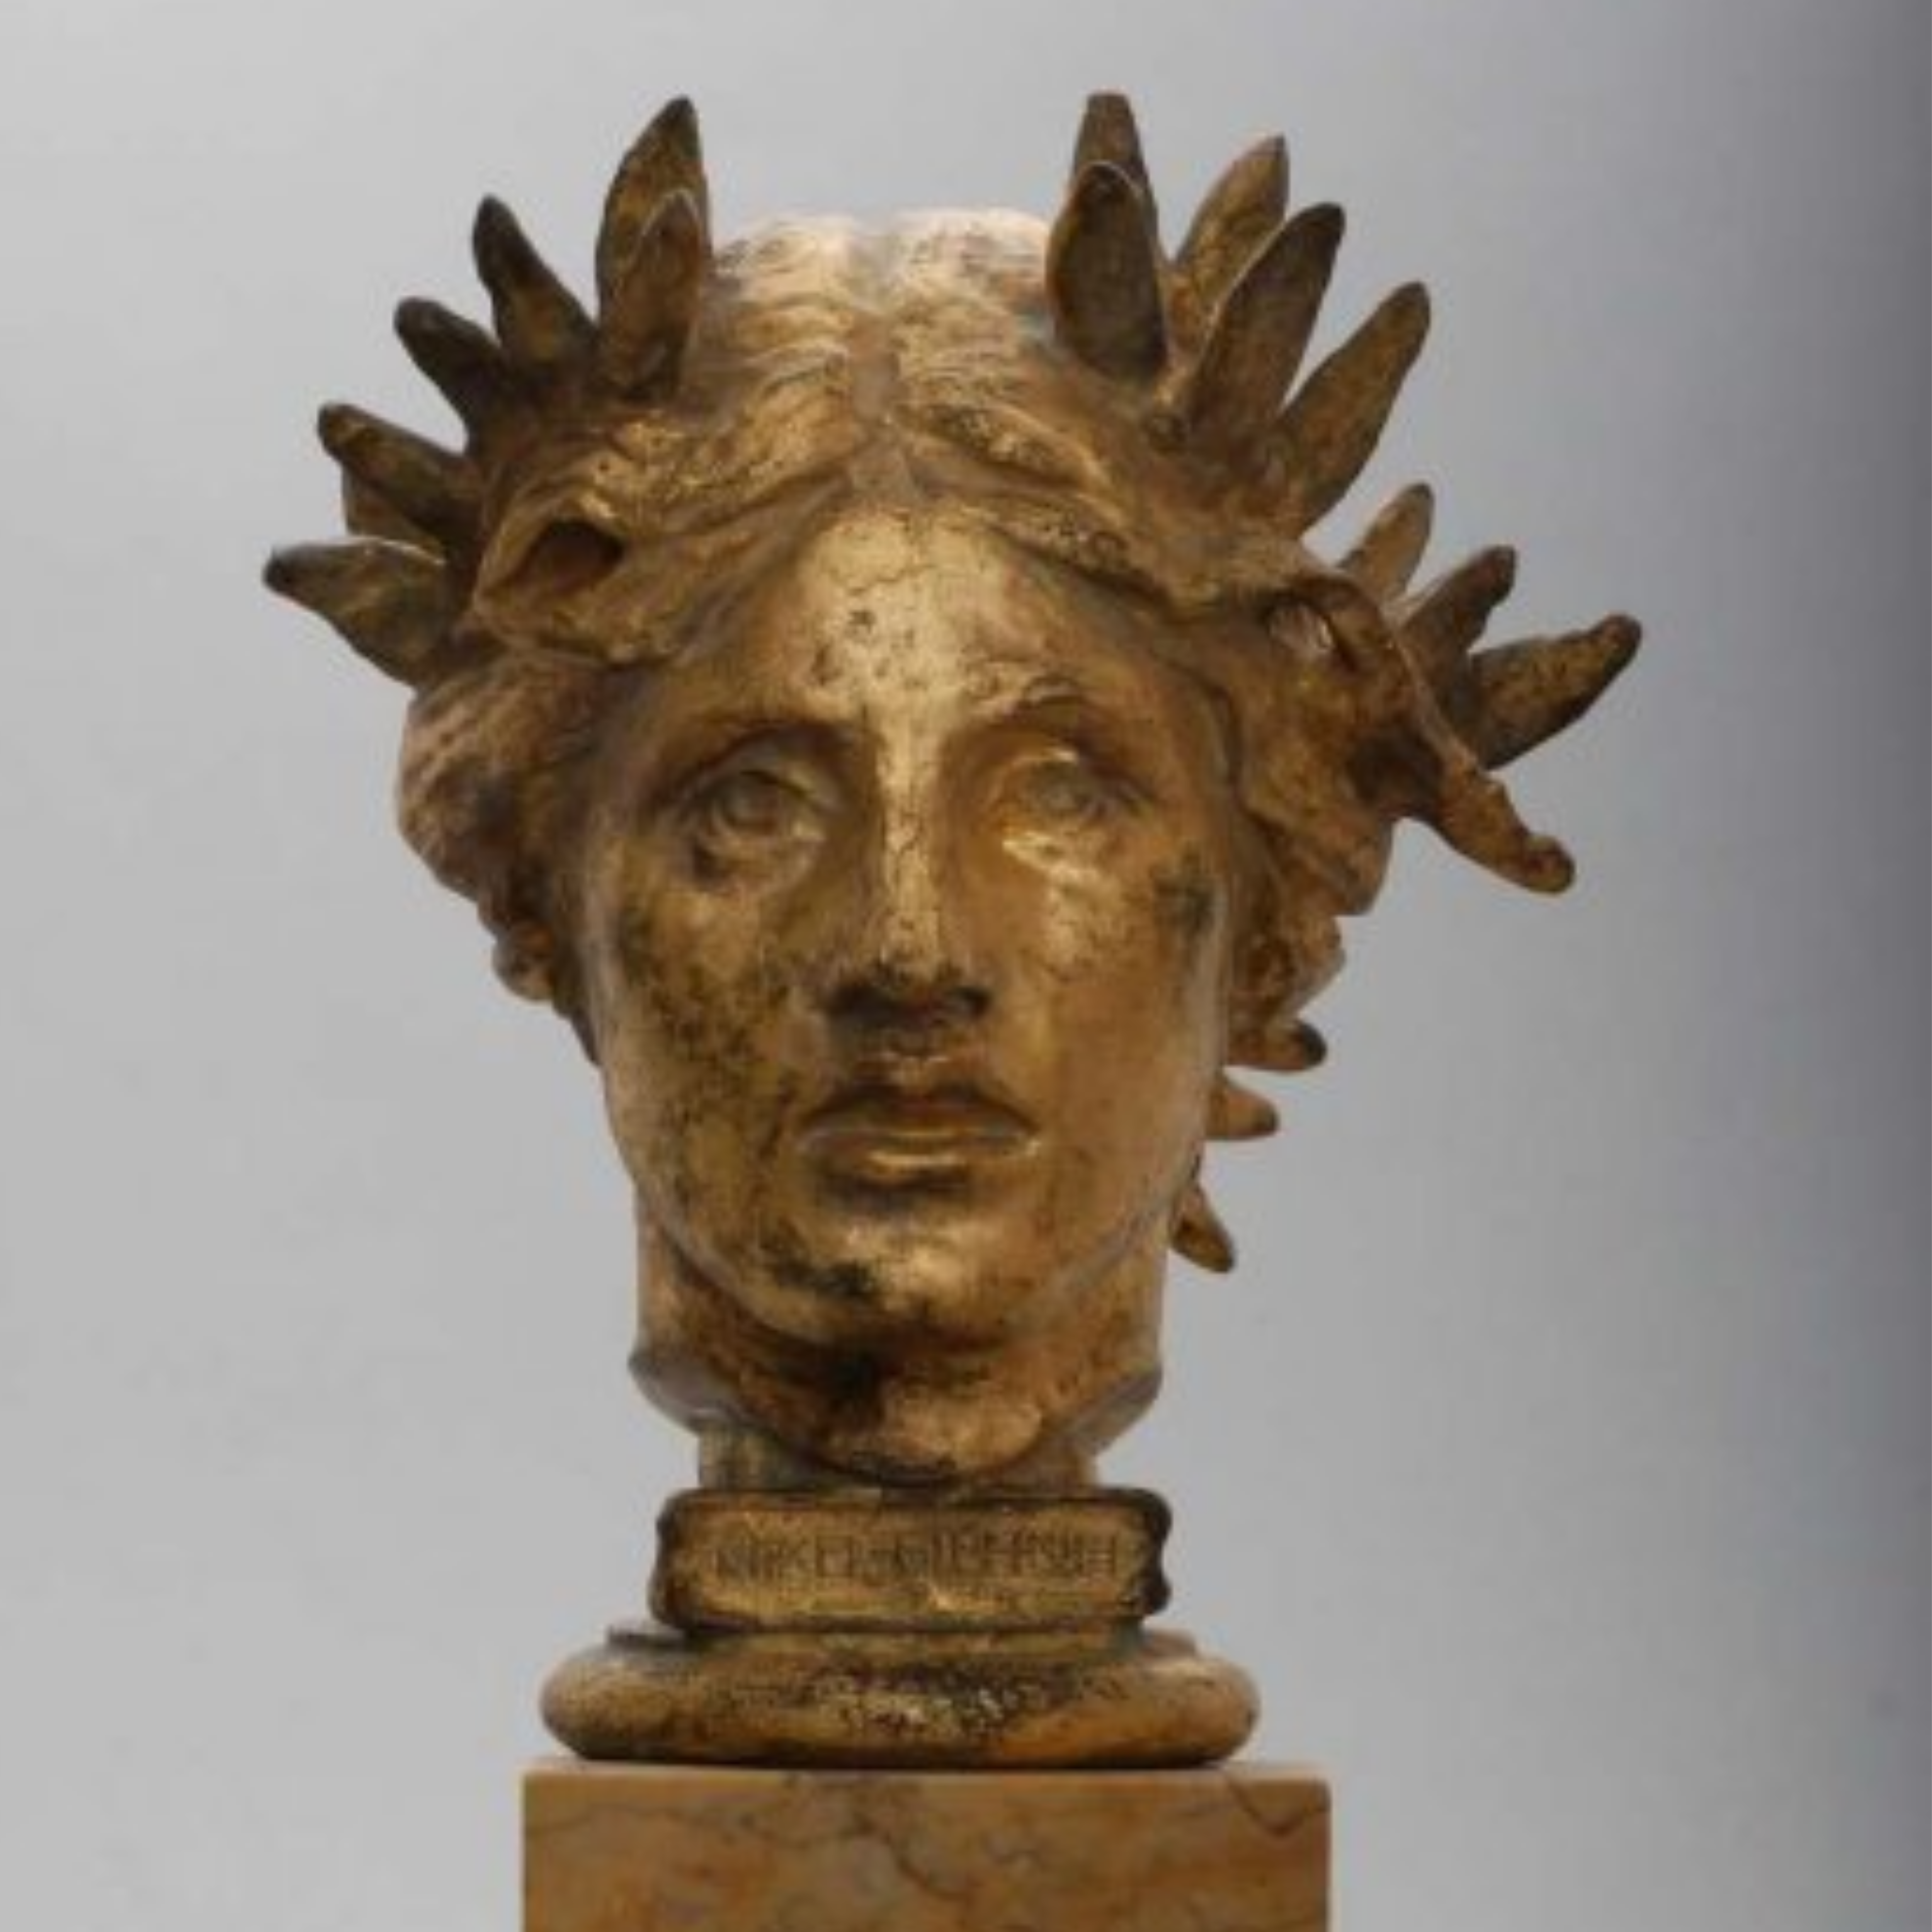 Gilded bronze bust of Victory with a garland on her head, gray background.